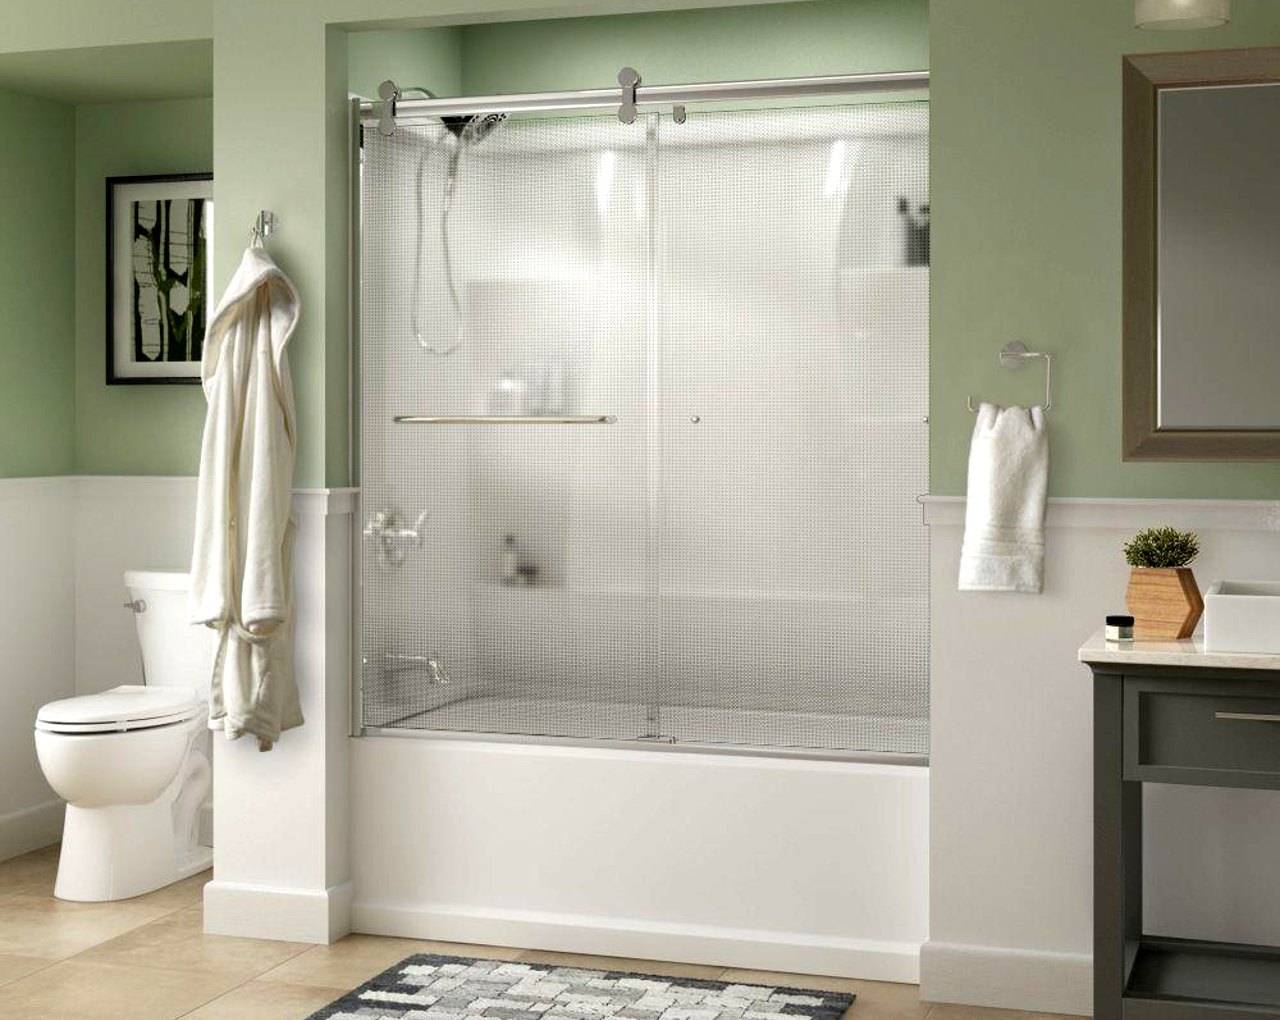 Combo bathtub and shower contemporary